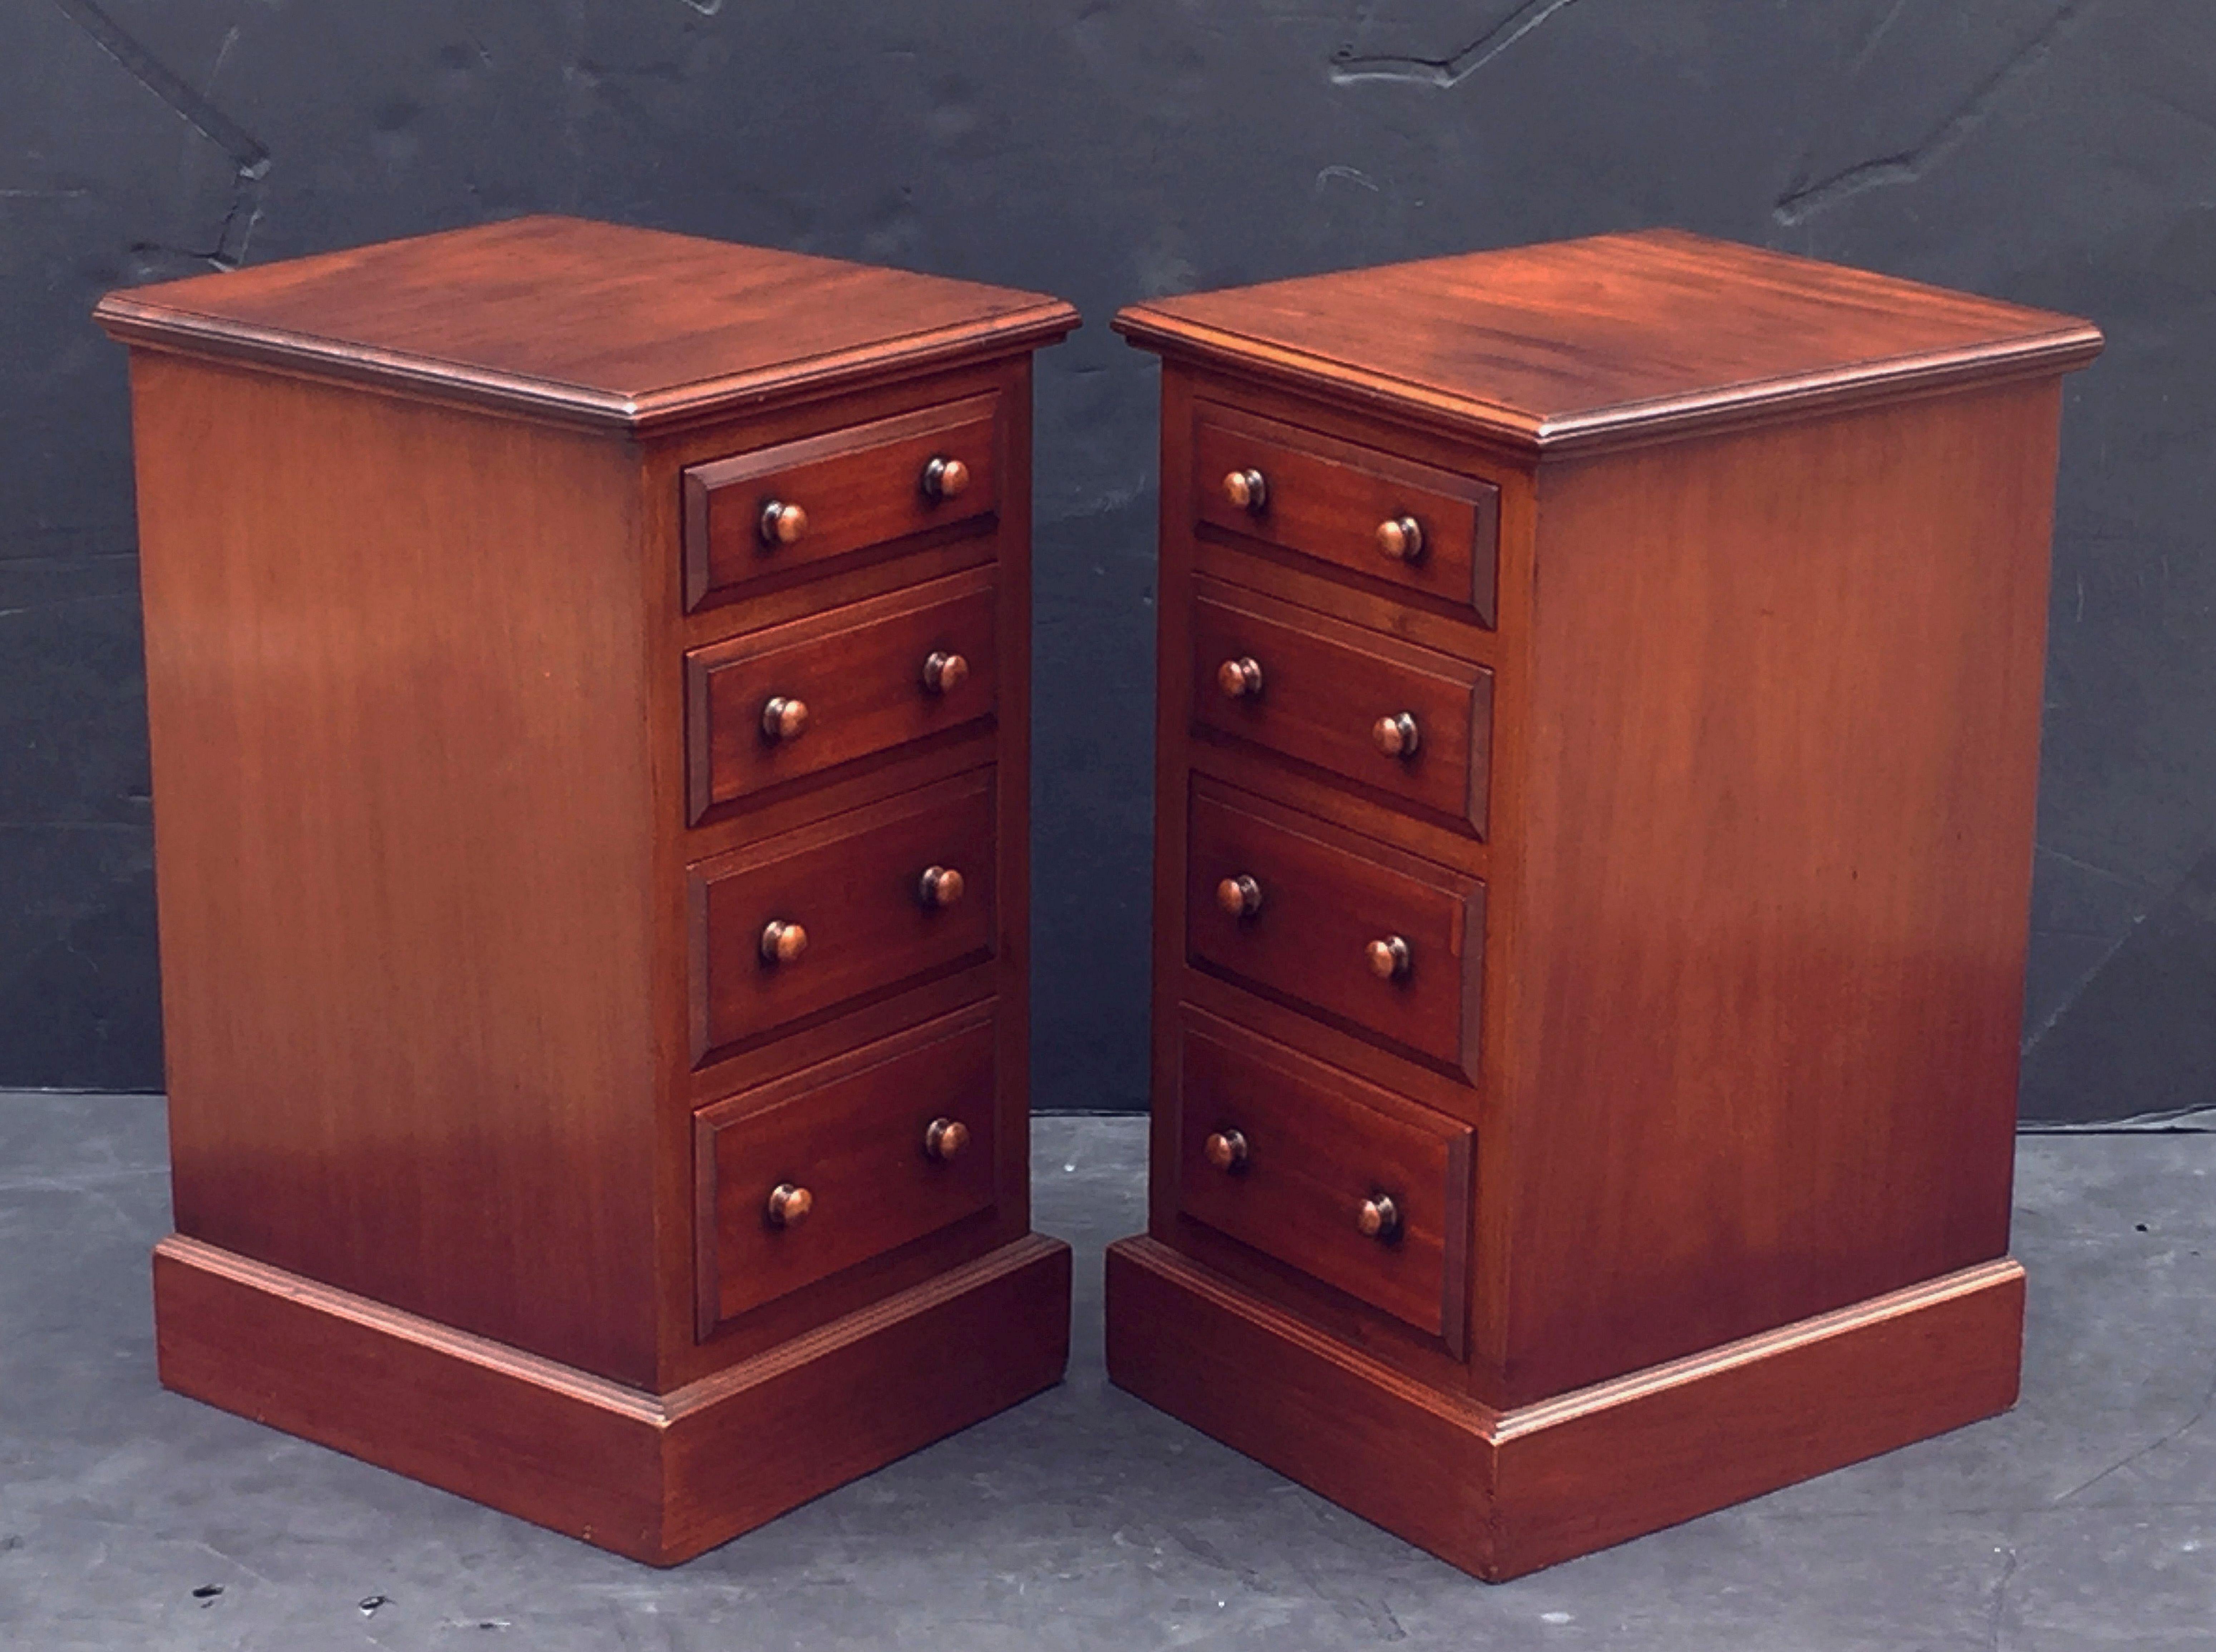 20th Century English Bedside Chests or Cabinet Nightstands of Mahogany - 'Priced as a Pair'